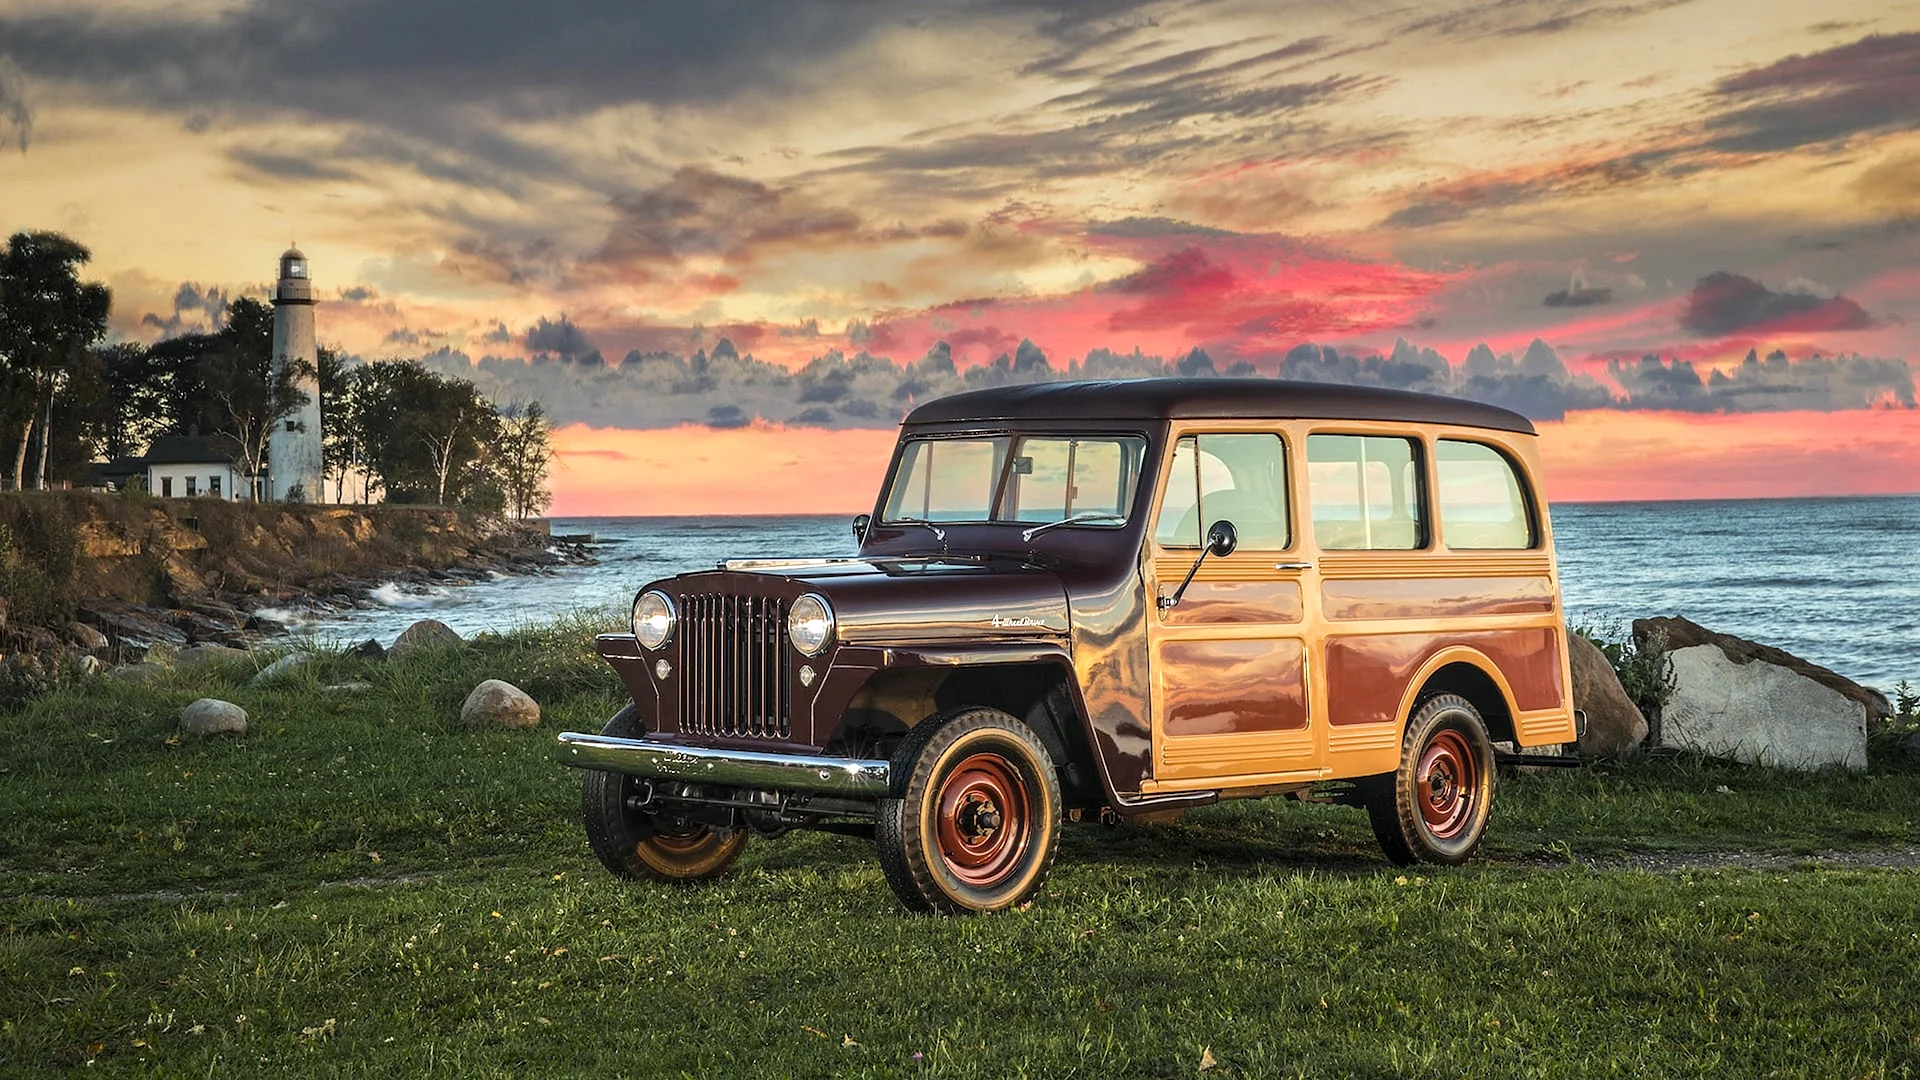 62 Jeep Willys Wagon Wallpaper